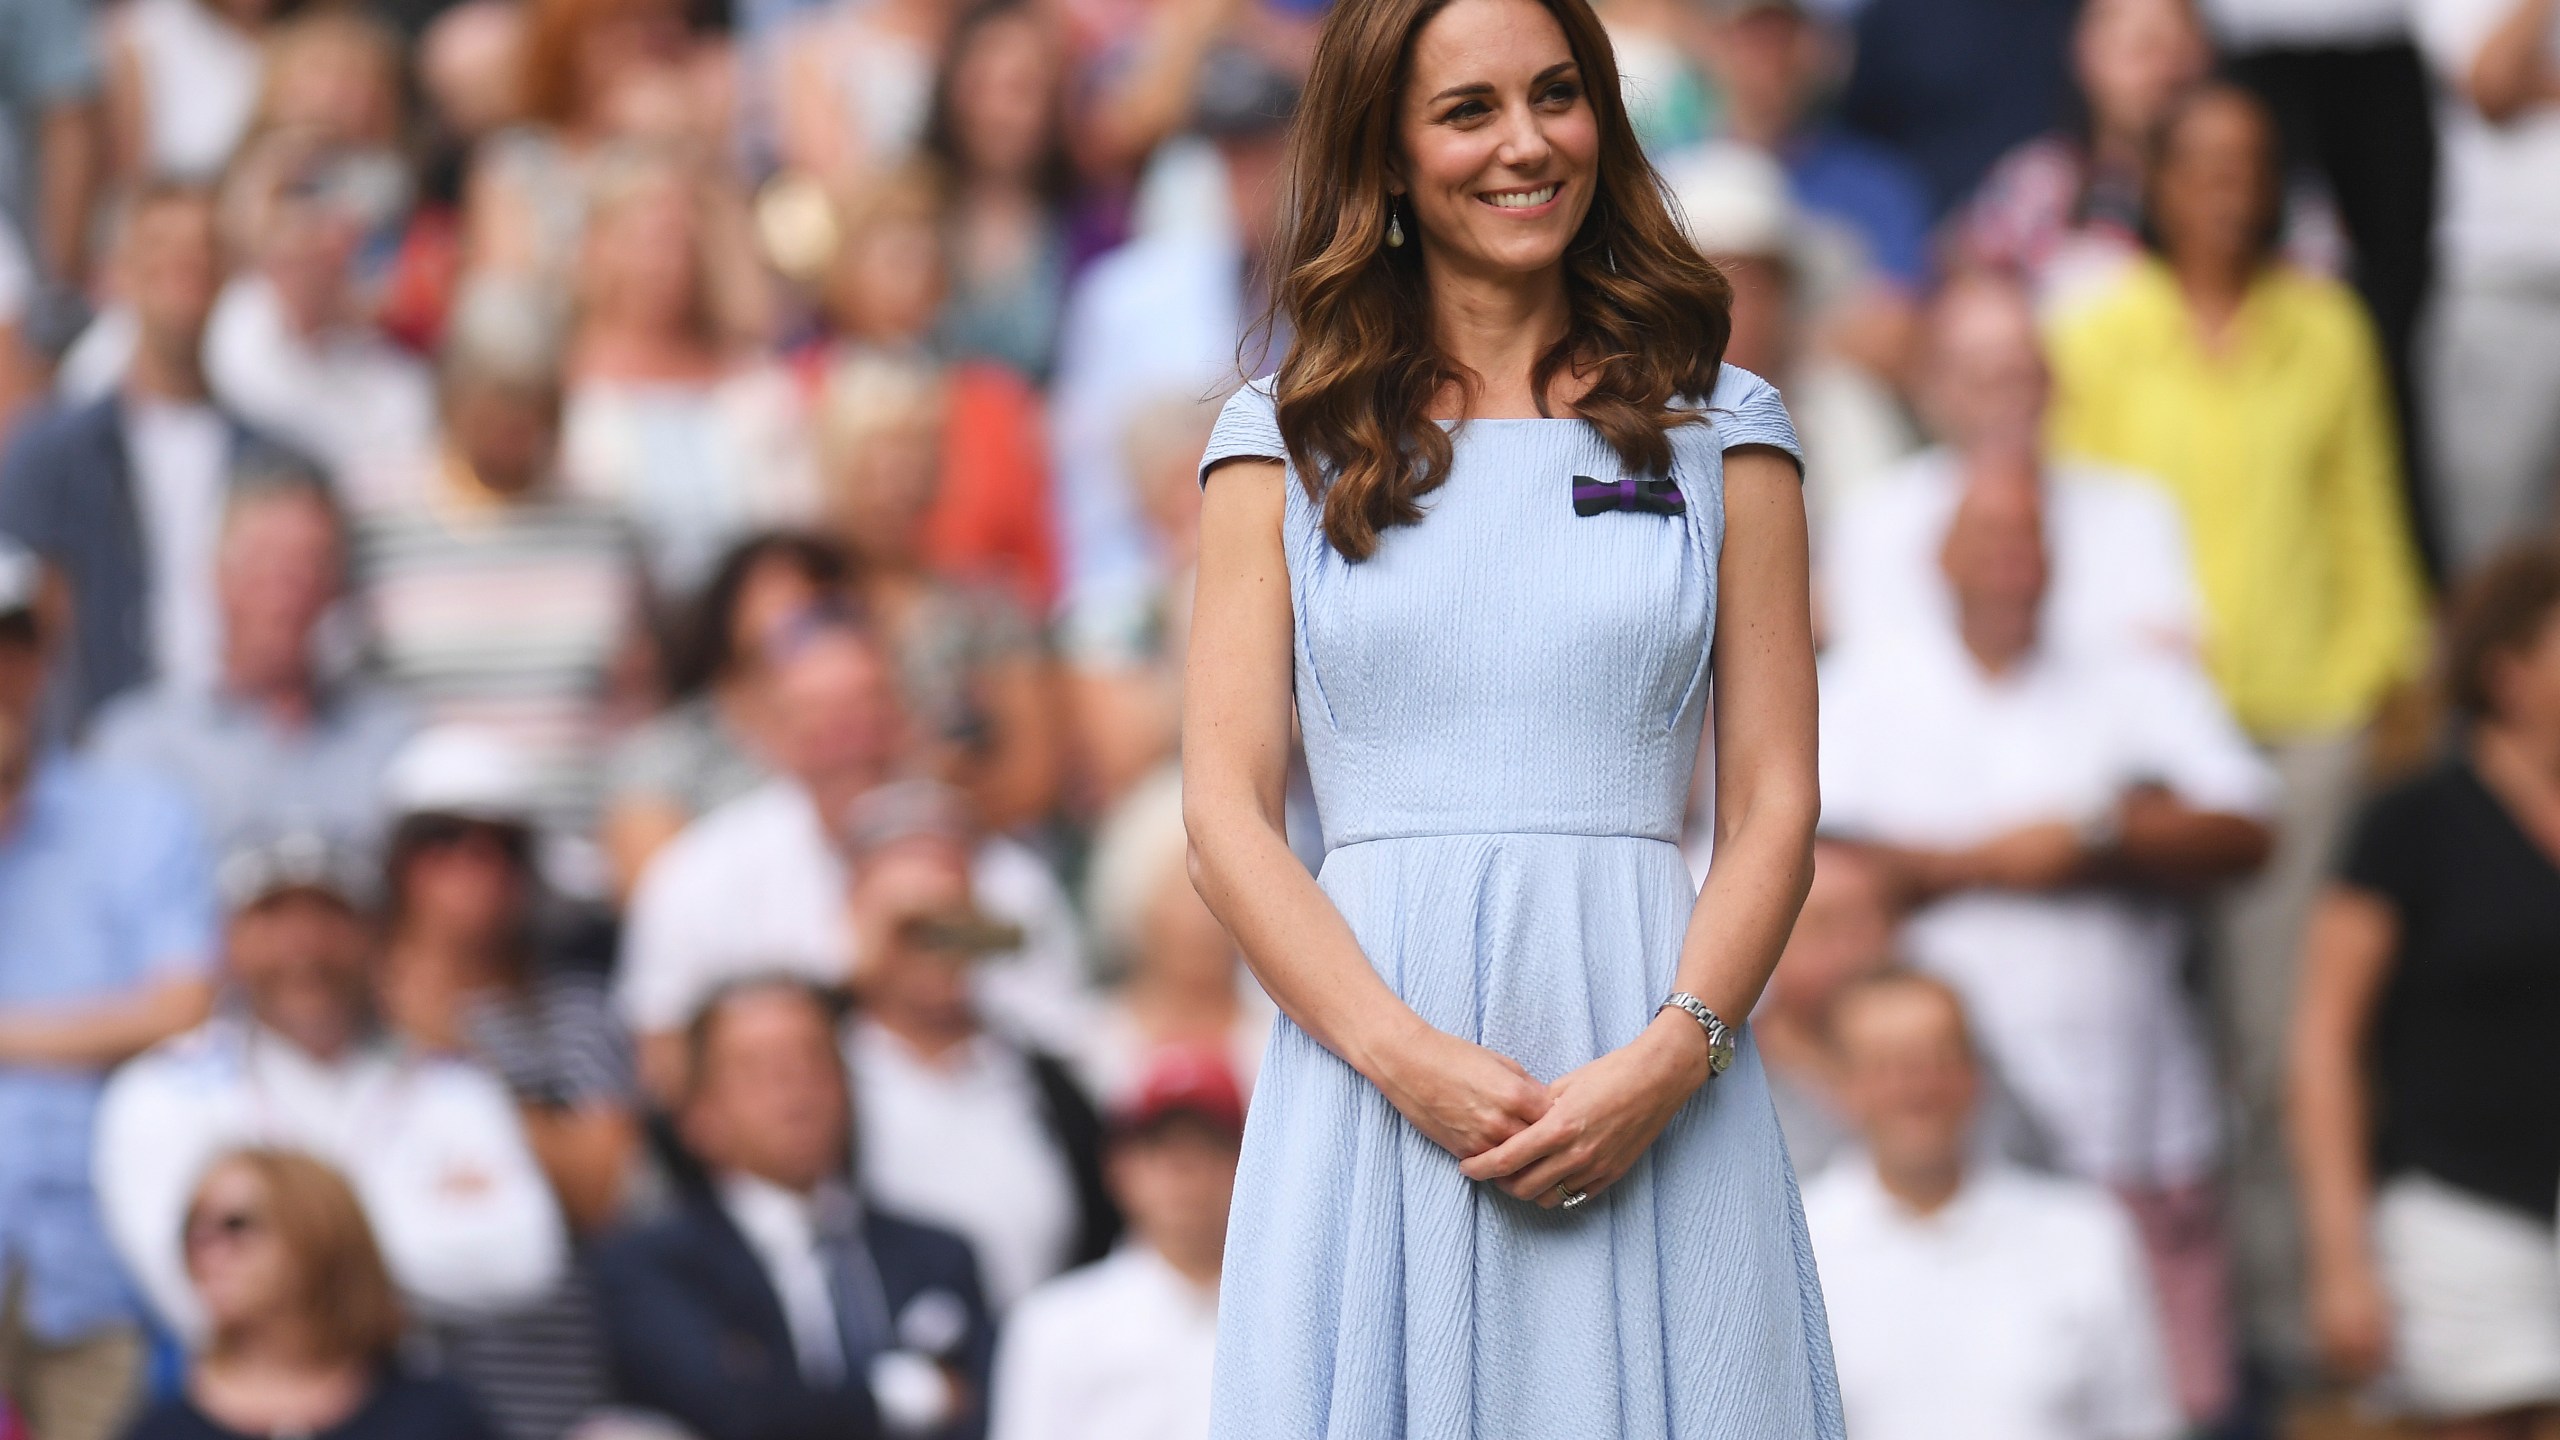 Britain's Kate, Duchess of Cambridge stands on centre court during the trophy presentation after Serbia's Novak Djokovic defeated Switzerland's Roger Federer during the men's singles final match of the Wimbledon Tennis Championships in London, Sunday, July 14, 2019. (Laurence Griffiths/Pool Photo via AP, File)